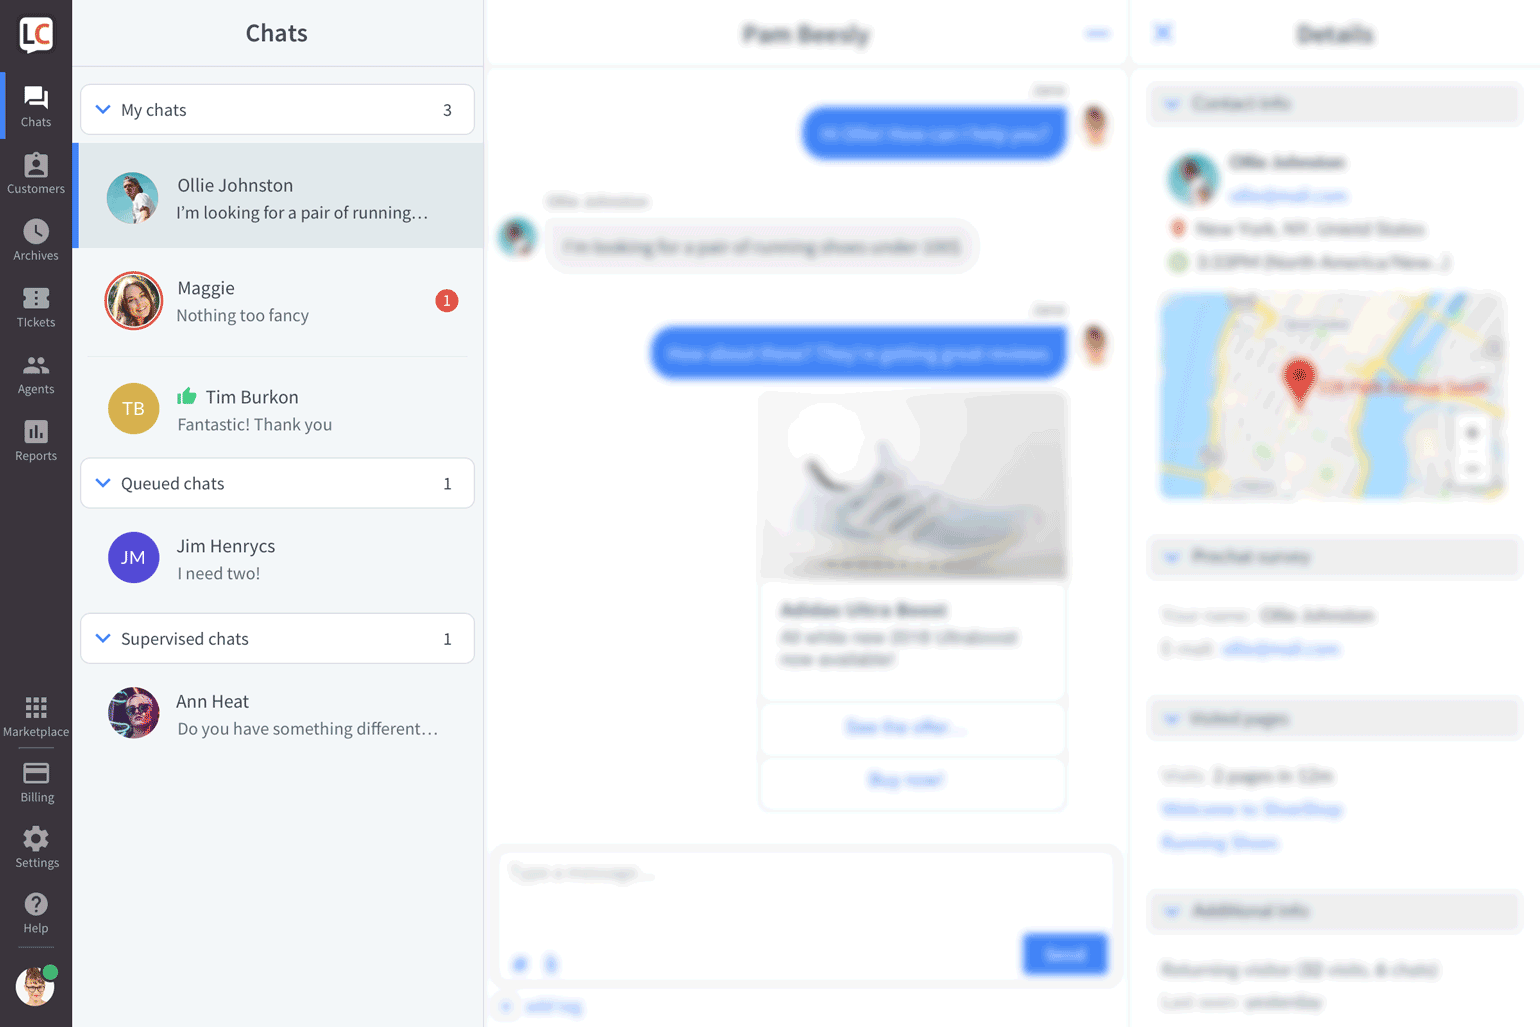 livechat - ongoing real-time chat